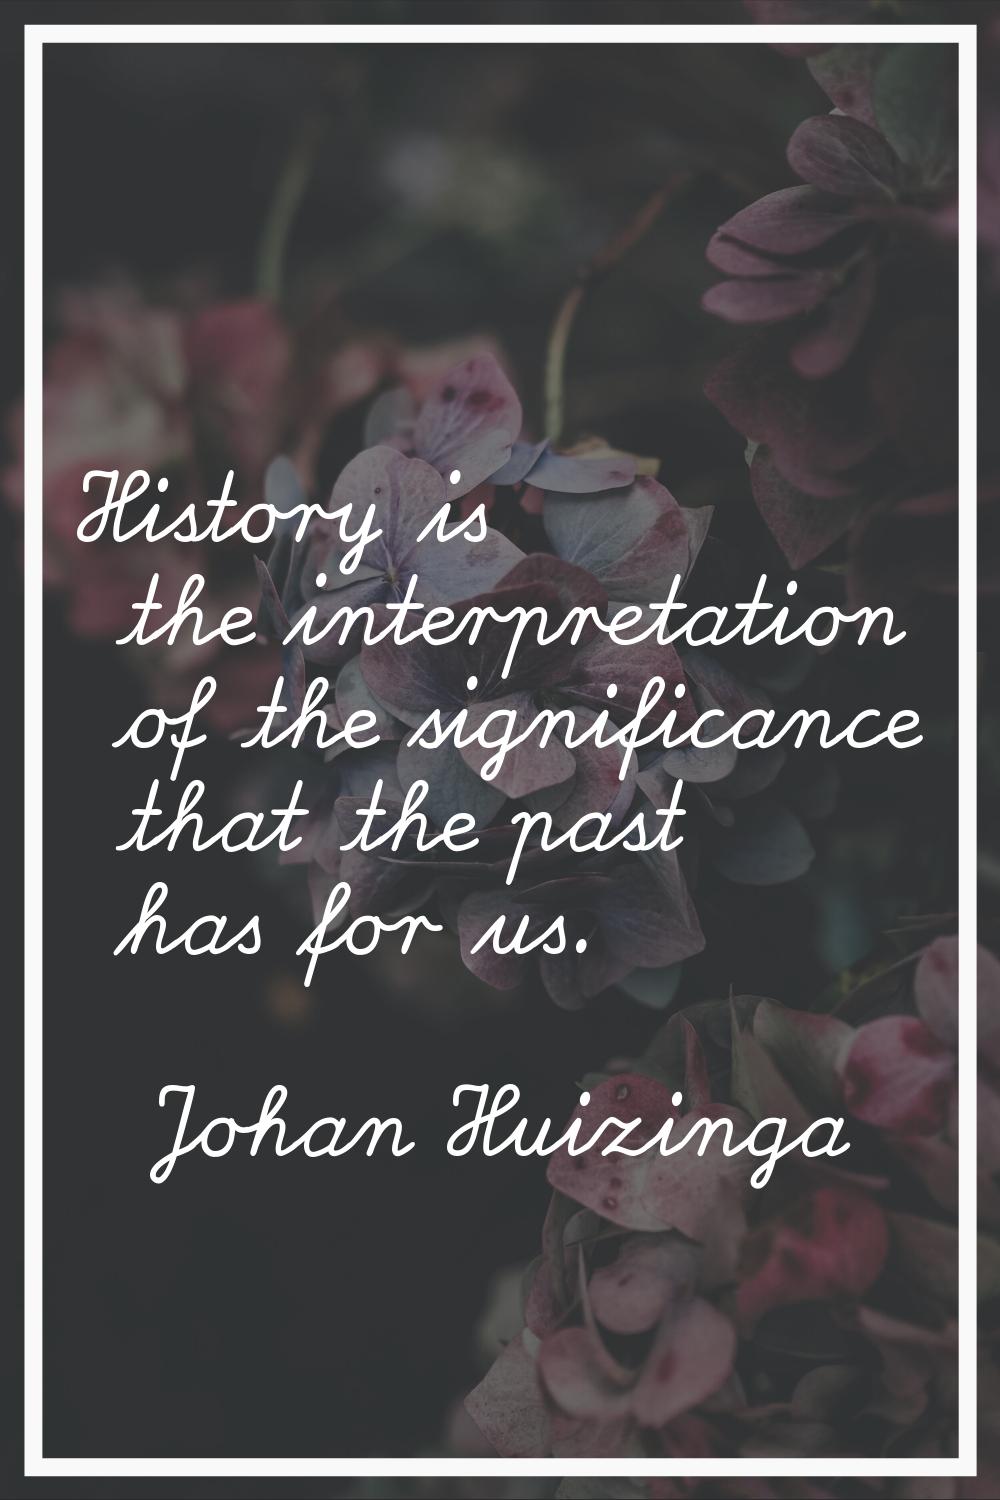 History is the interpretation of the significance that the past has for us.